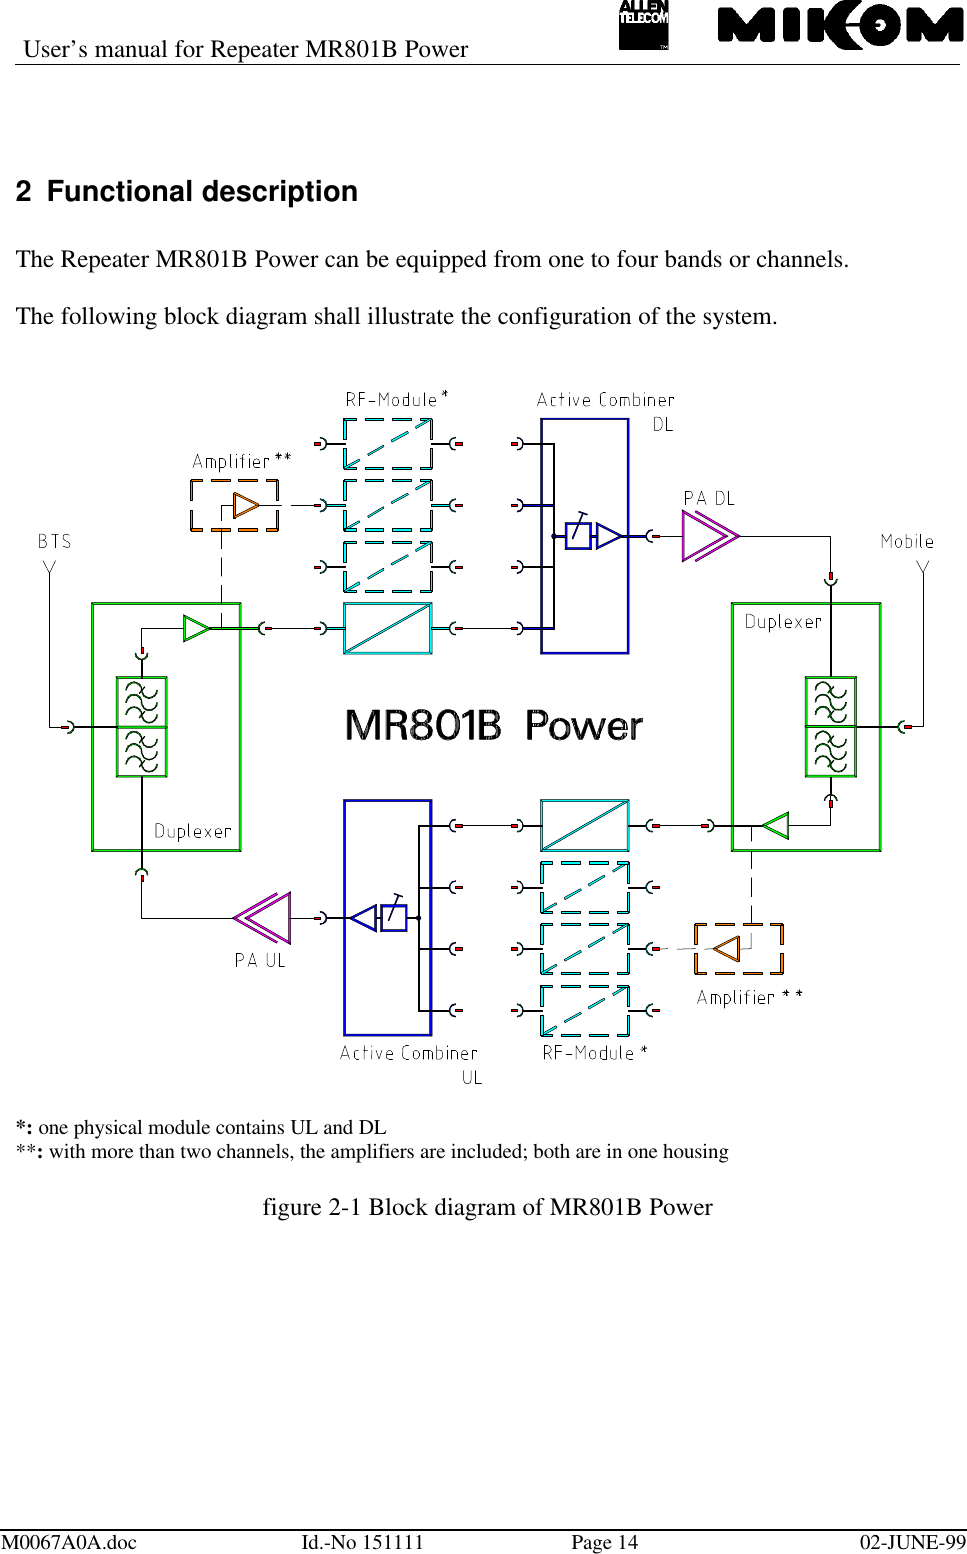 User’s manual for Repeater MR801B PowerM0067A0A.doc Id.-No 151111 Page 14 02-JUNE-992 Functional descriptionThe Repeater MR801B Power can be equipped from one to four bands or channels.The following block diagram shall illustrate the configuration of the system.*: one physical module contains UL and DL**: with more than two channels, the amplifiers are included; both are in one housingfigure 2-1 Block diagram of MR801B Power